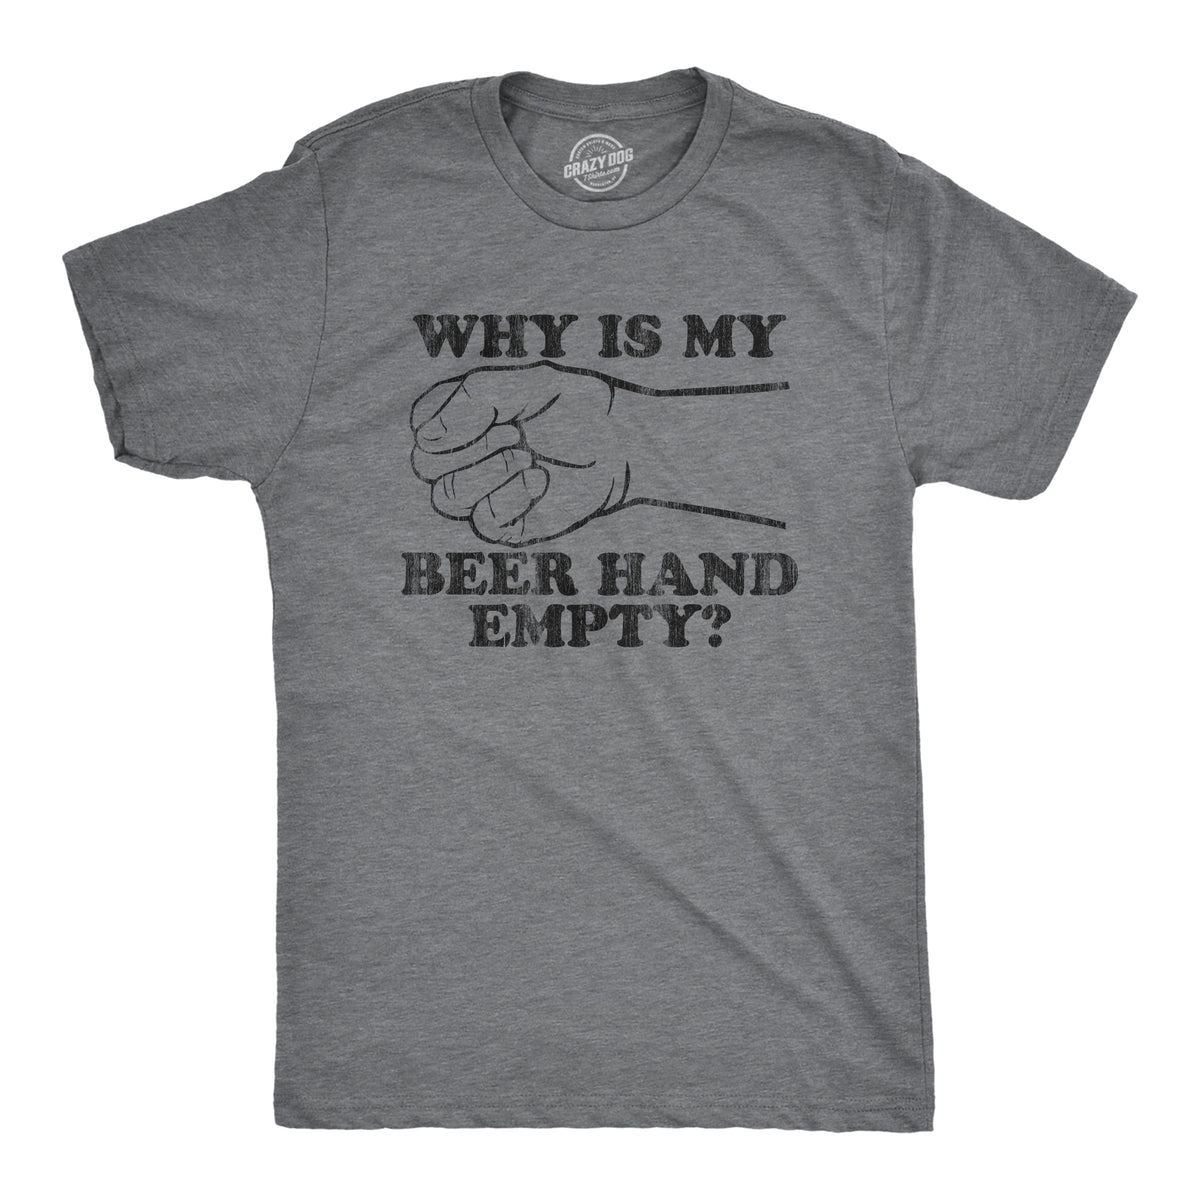 Funny Light Heather Grey Why Is My Beer Hand Empty Mens T Shirt Nerdy Beer Drinking Tee